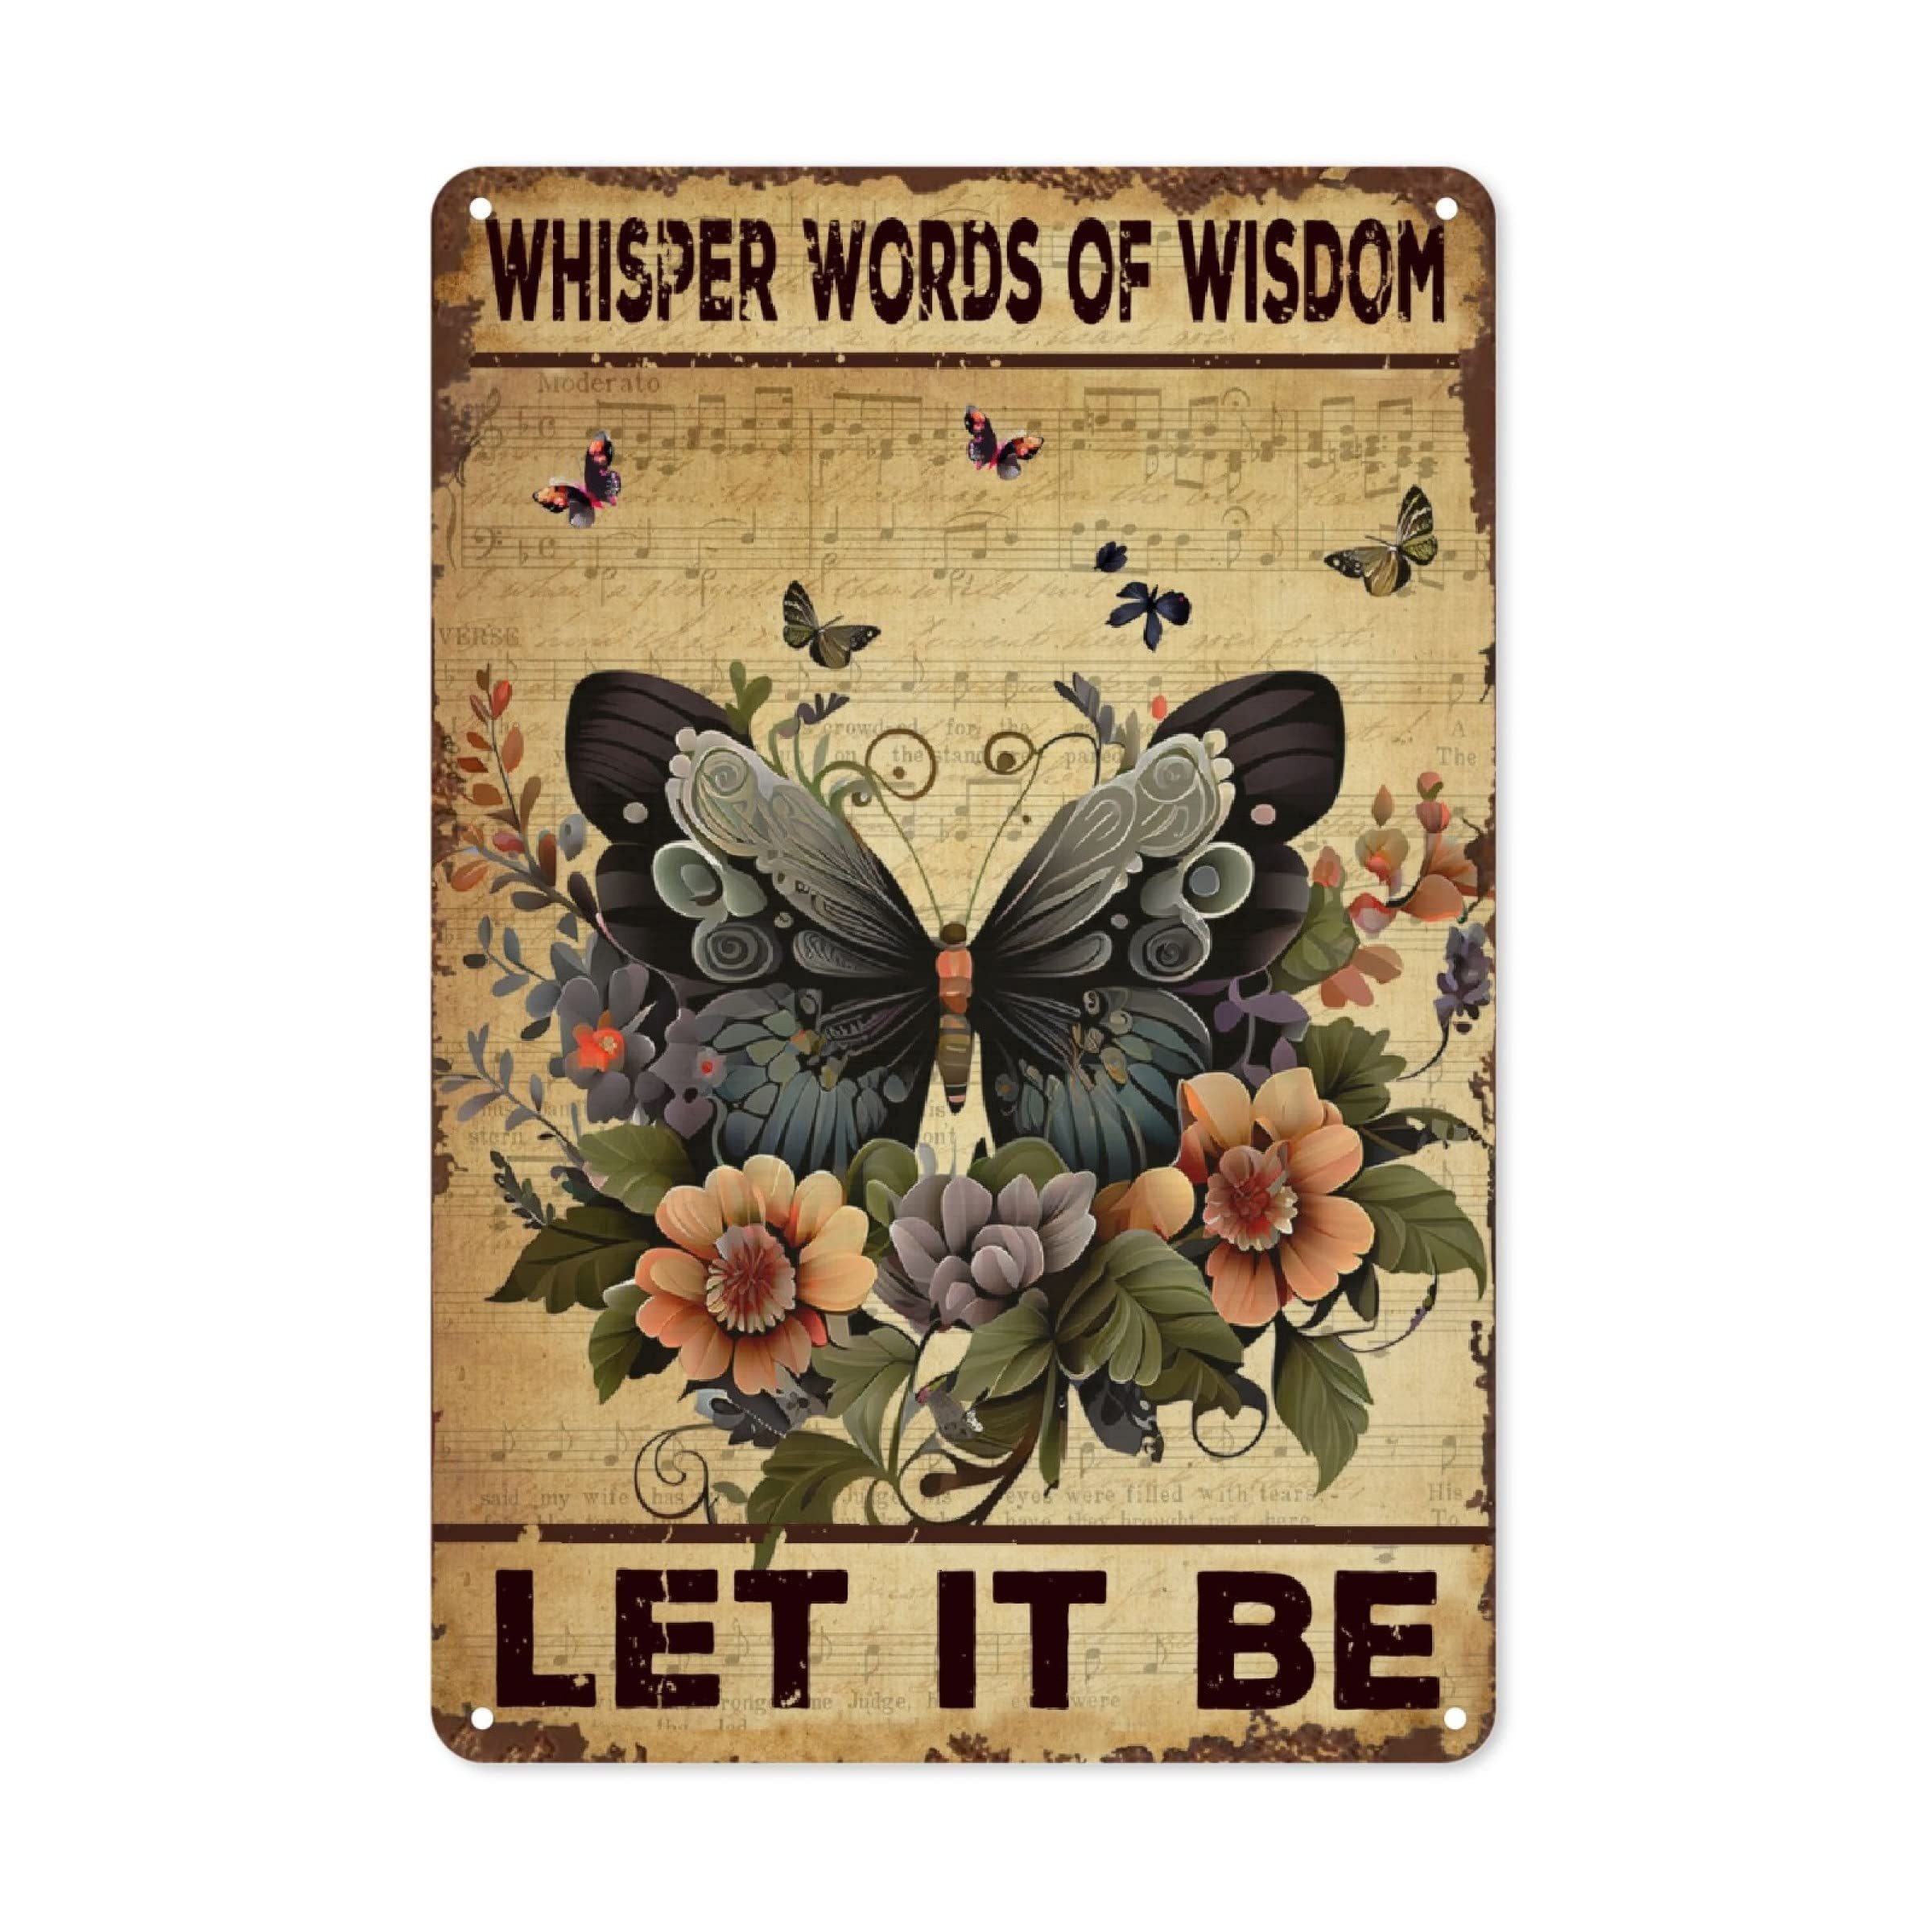 

1pc Vintage Whisper Words Of Wisdom Let It Be Butterfly Sign For Restroom Bar Pub Club Cafe Home Restaurant Wall Decoration 7.9x11.9inch Aluminum